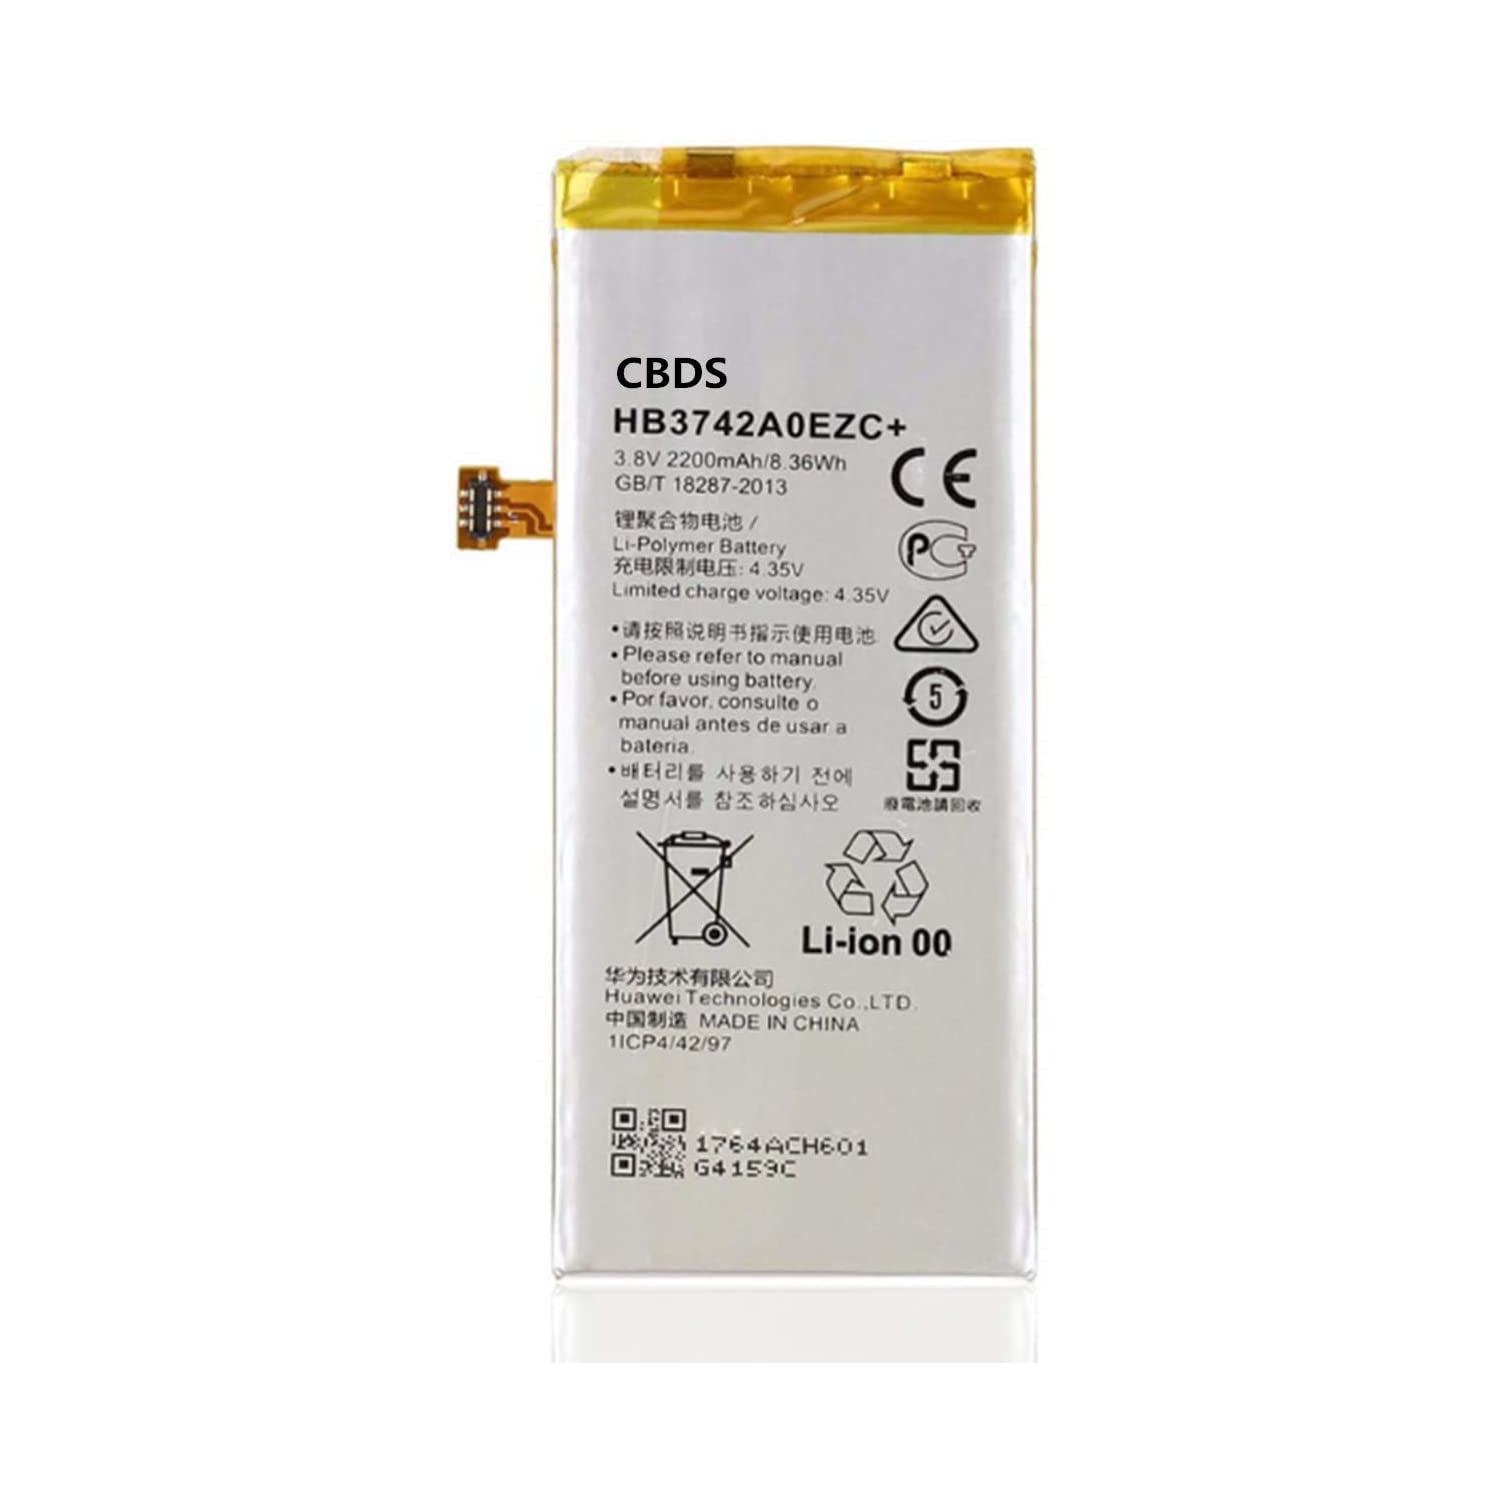 (CBDS) 2200mAh, 8.36 Wh Replacement Battery - Compatible with Huawei P8 LITE HB3742A0EZC+ in Non-Retail Packaging.